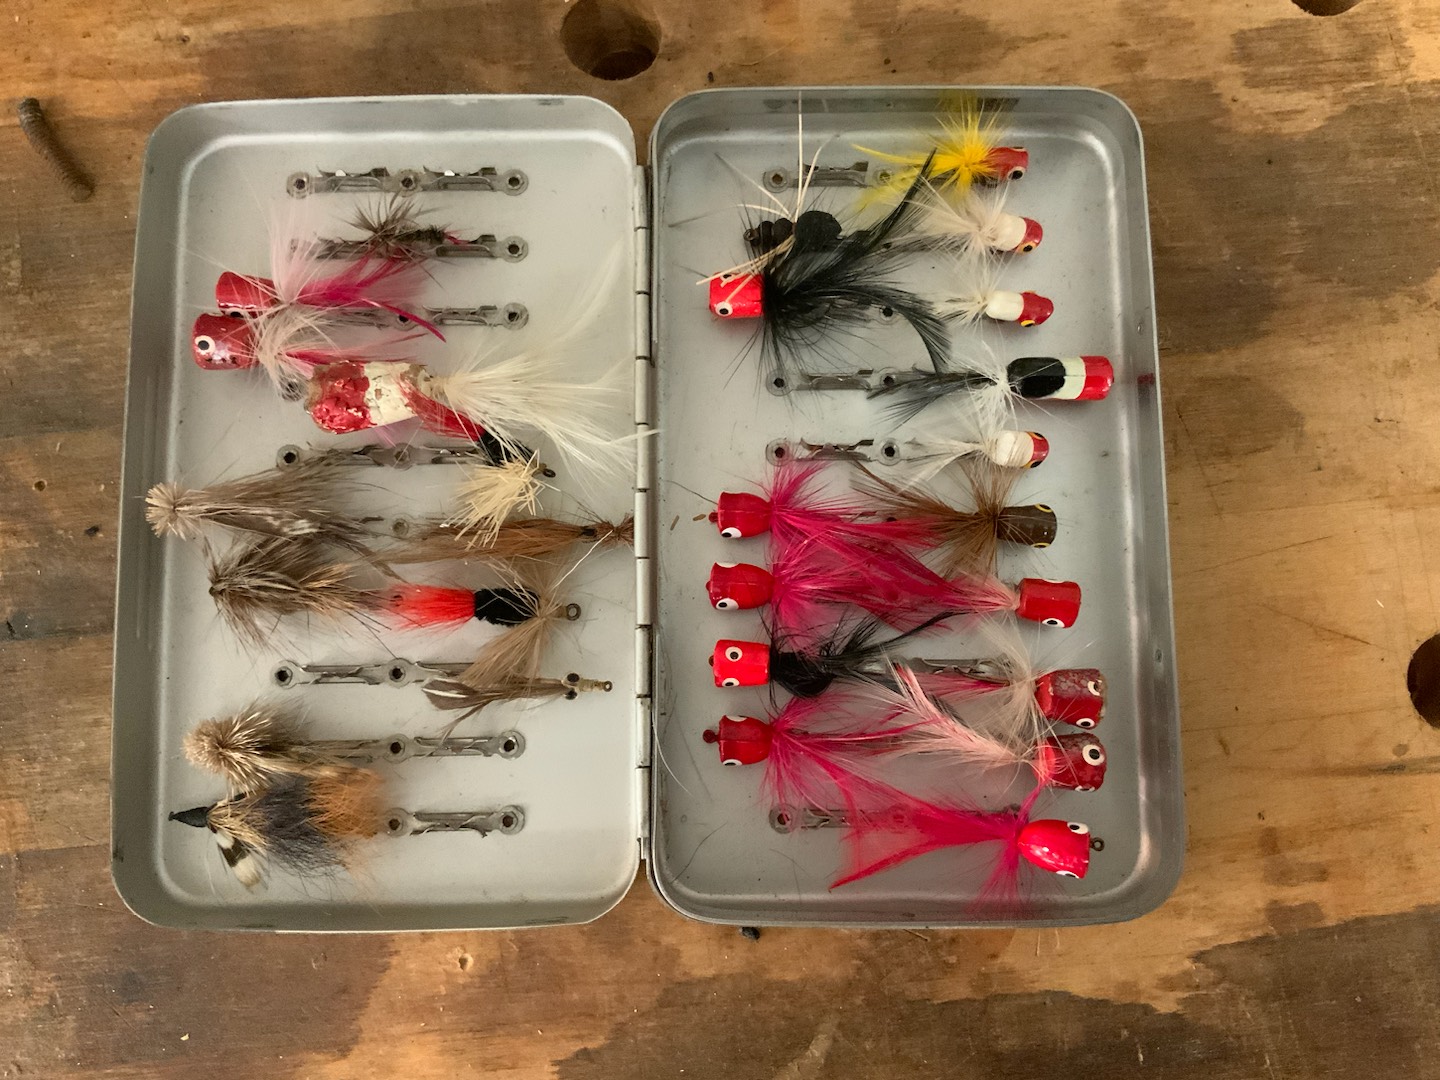 Sold at Auction: (10) Vintage Fly Fishing Lures